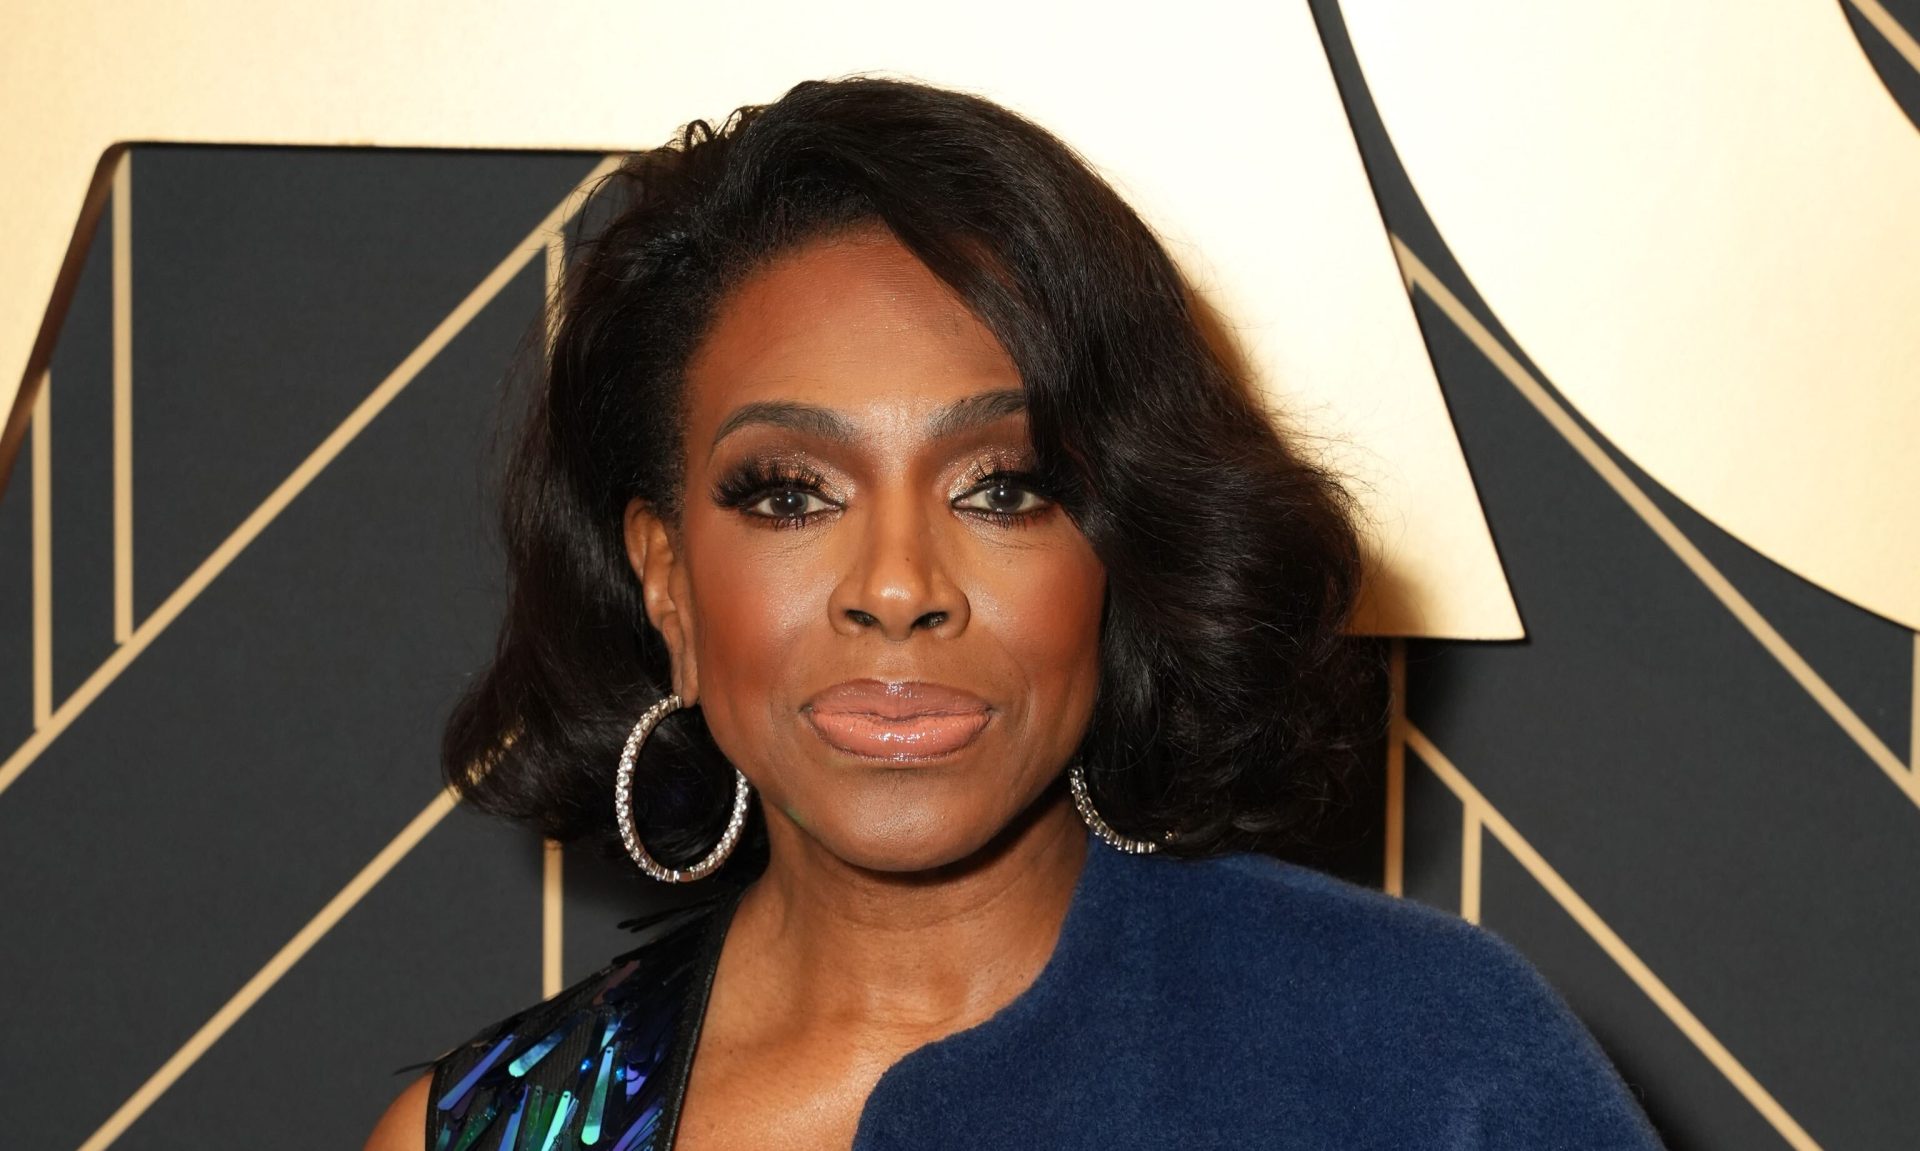 Sheryl Lee Ralph Says A ‘Famous TV Judge’ Sexually Assaulted Her And Network Execs ‘Did Not Care’